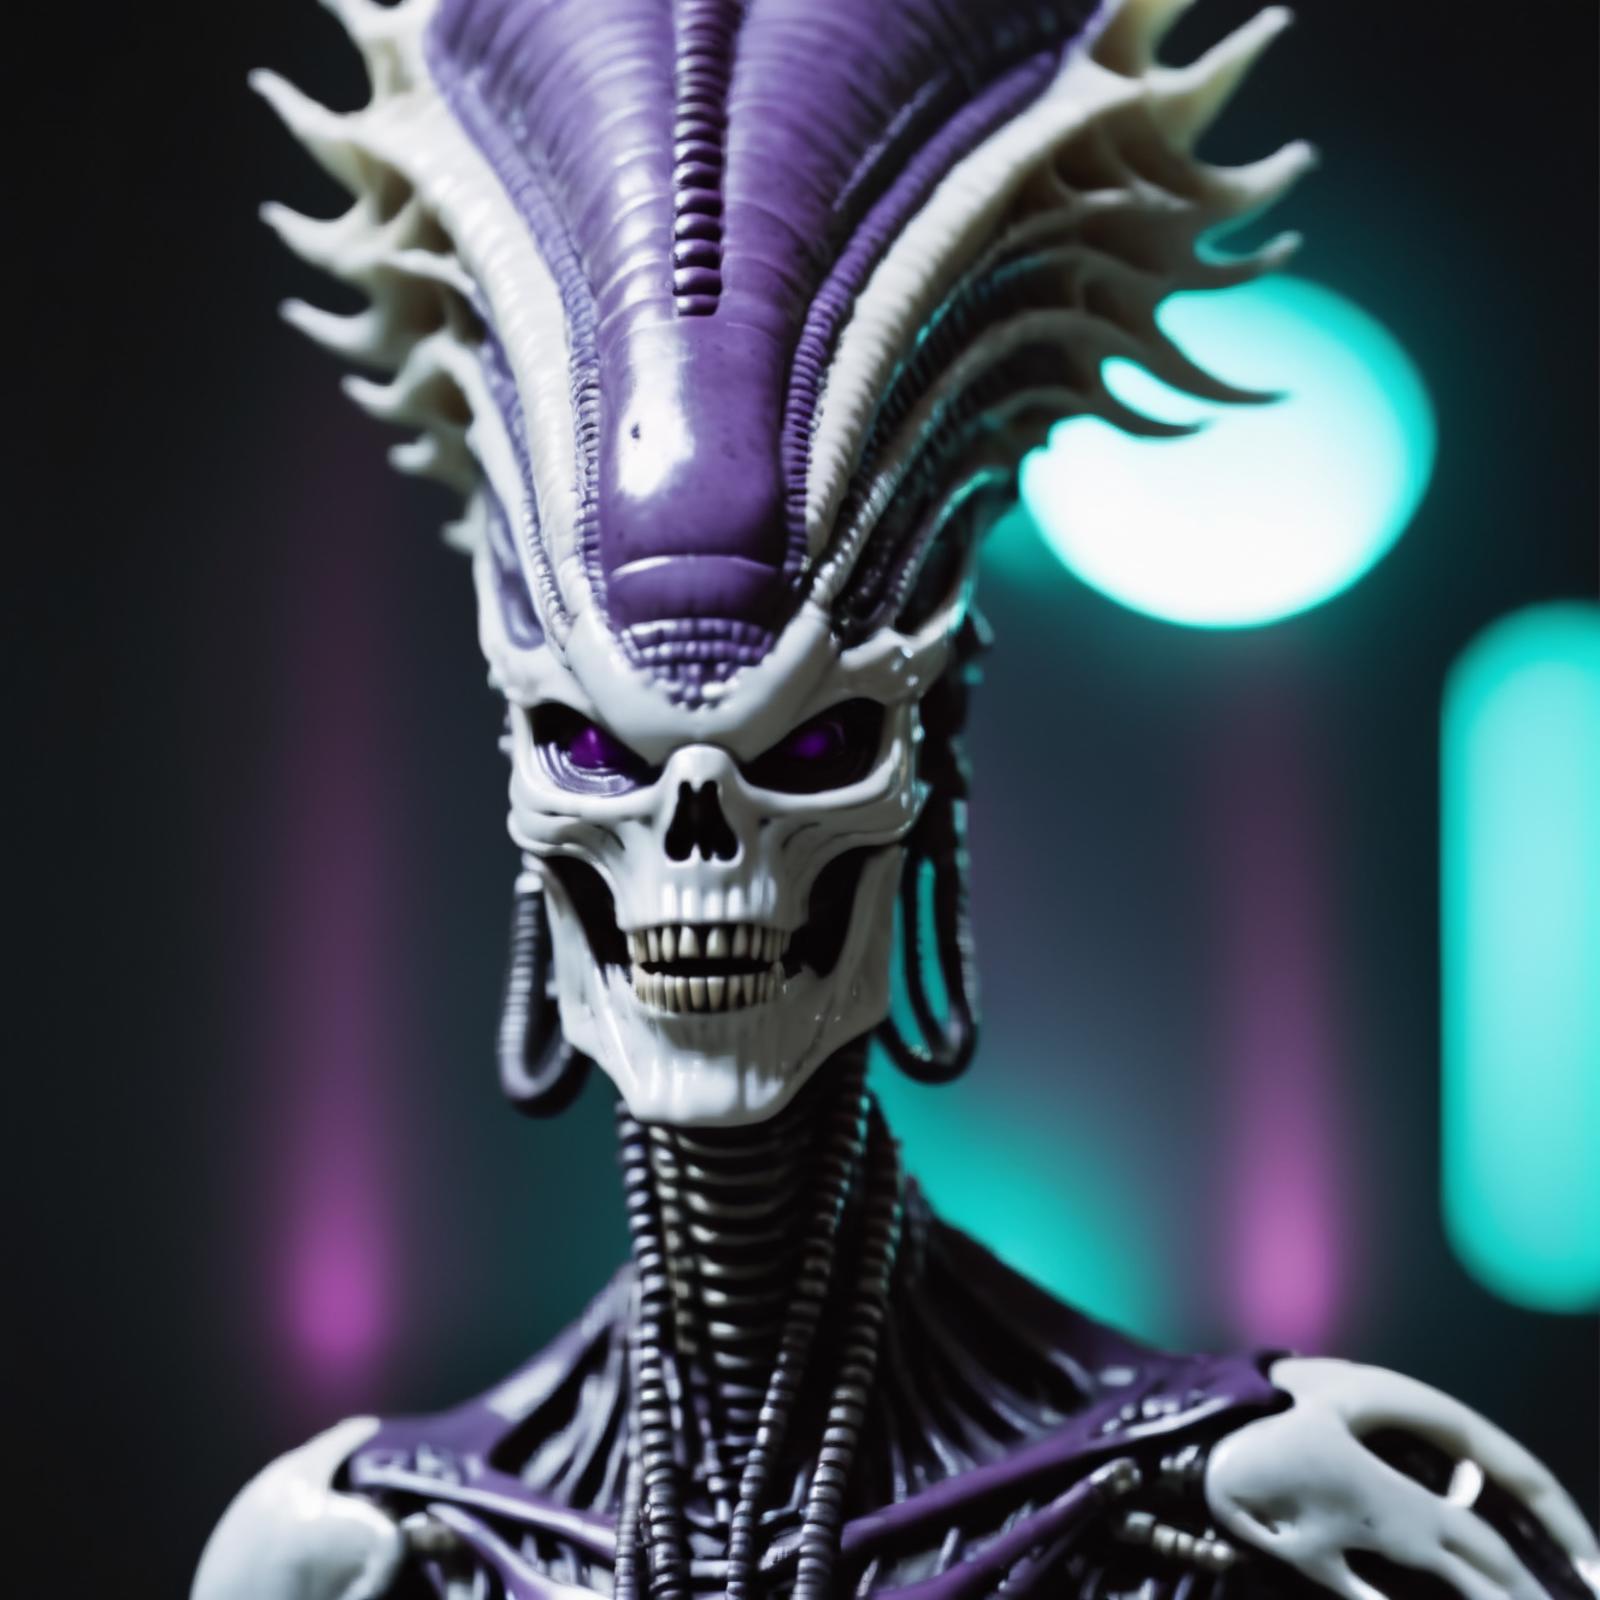 Alien God image by deep_synth